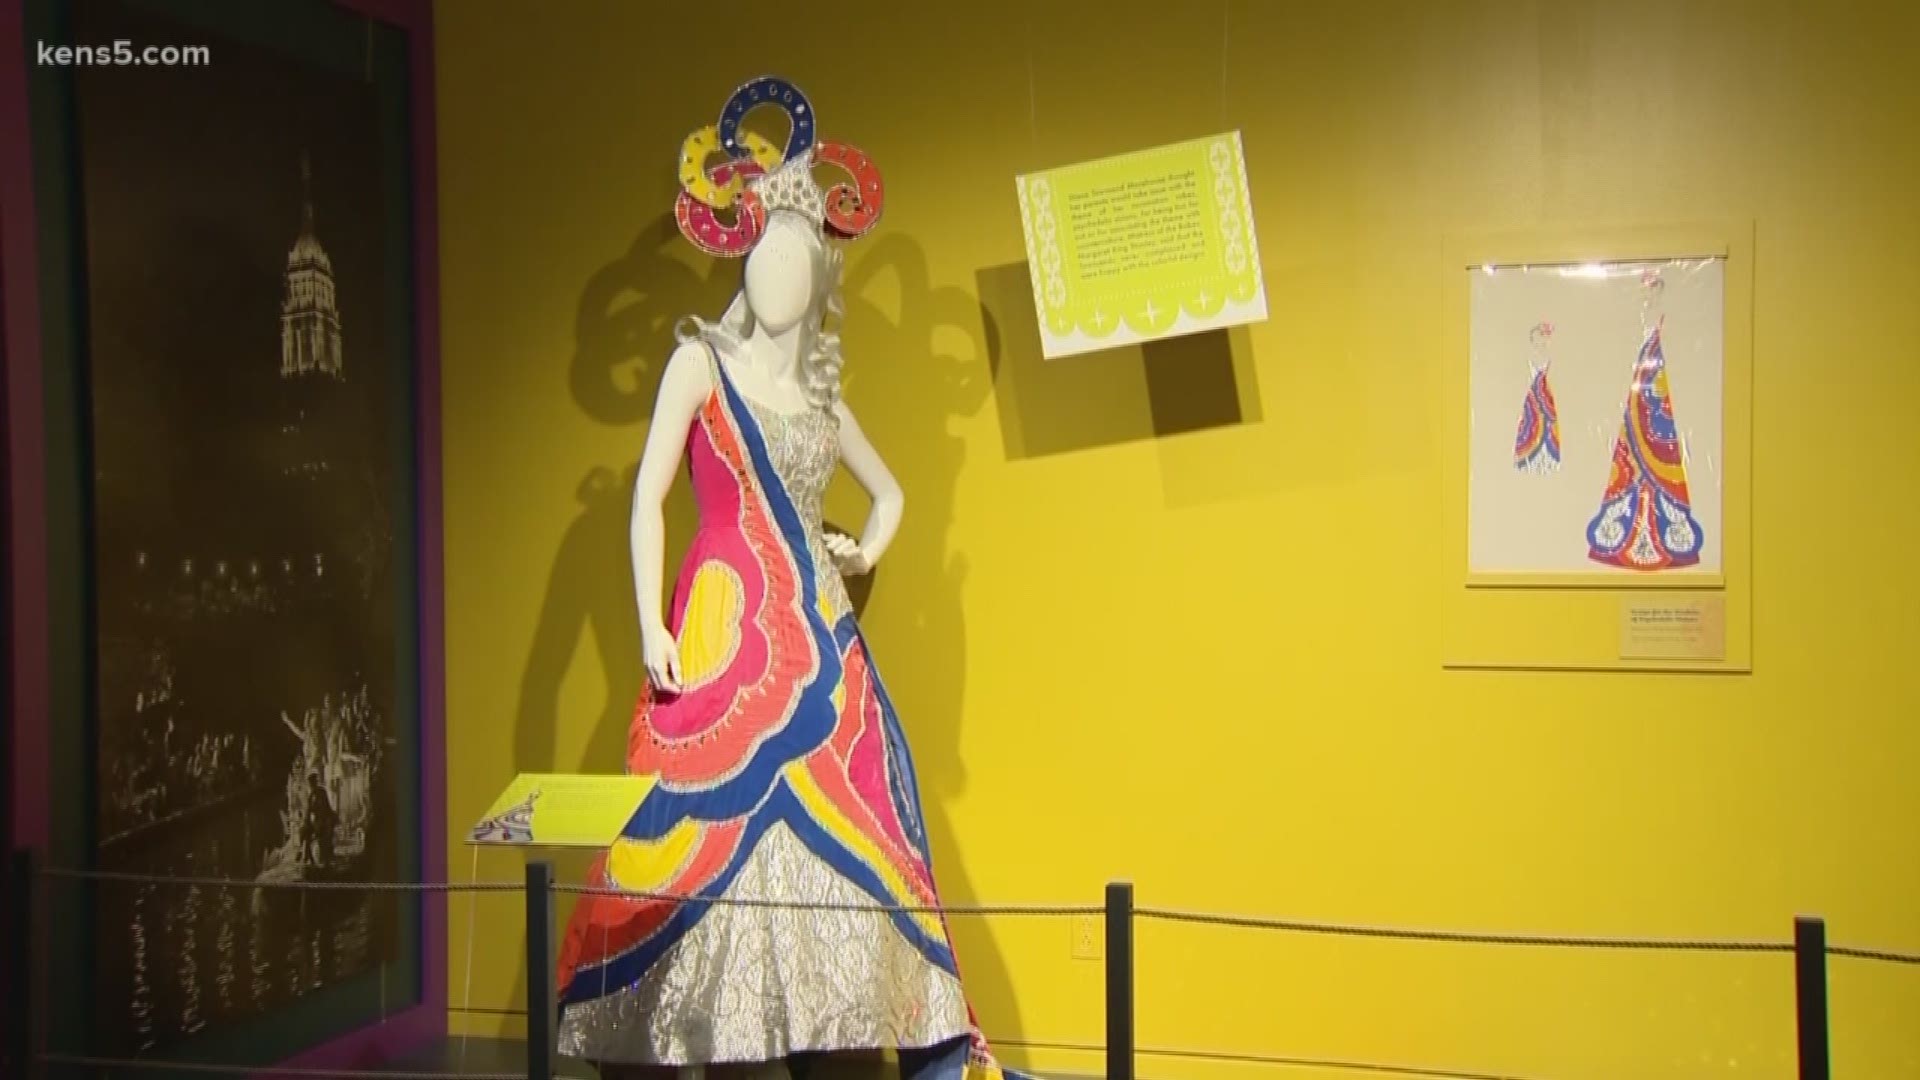 The Witte Museum's latest exhibit, Blast from the Past: Fiesta 1969, takes a trip back in time. The exhibit features fiesta memorabilia but with a space theme this year in honor of the 50th anniversary of the moon landing in 1969.